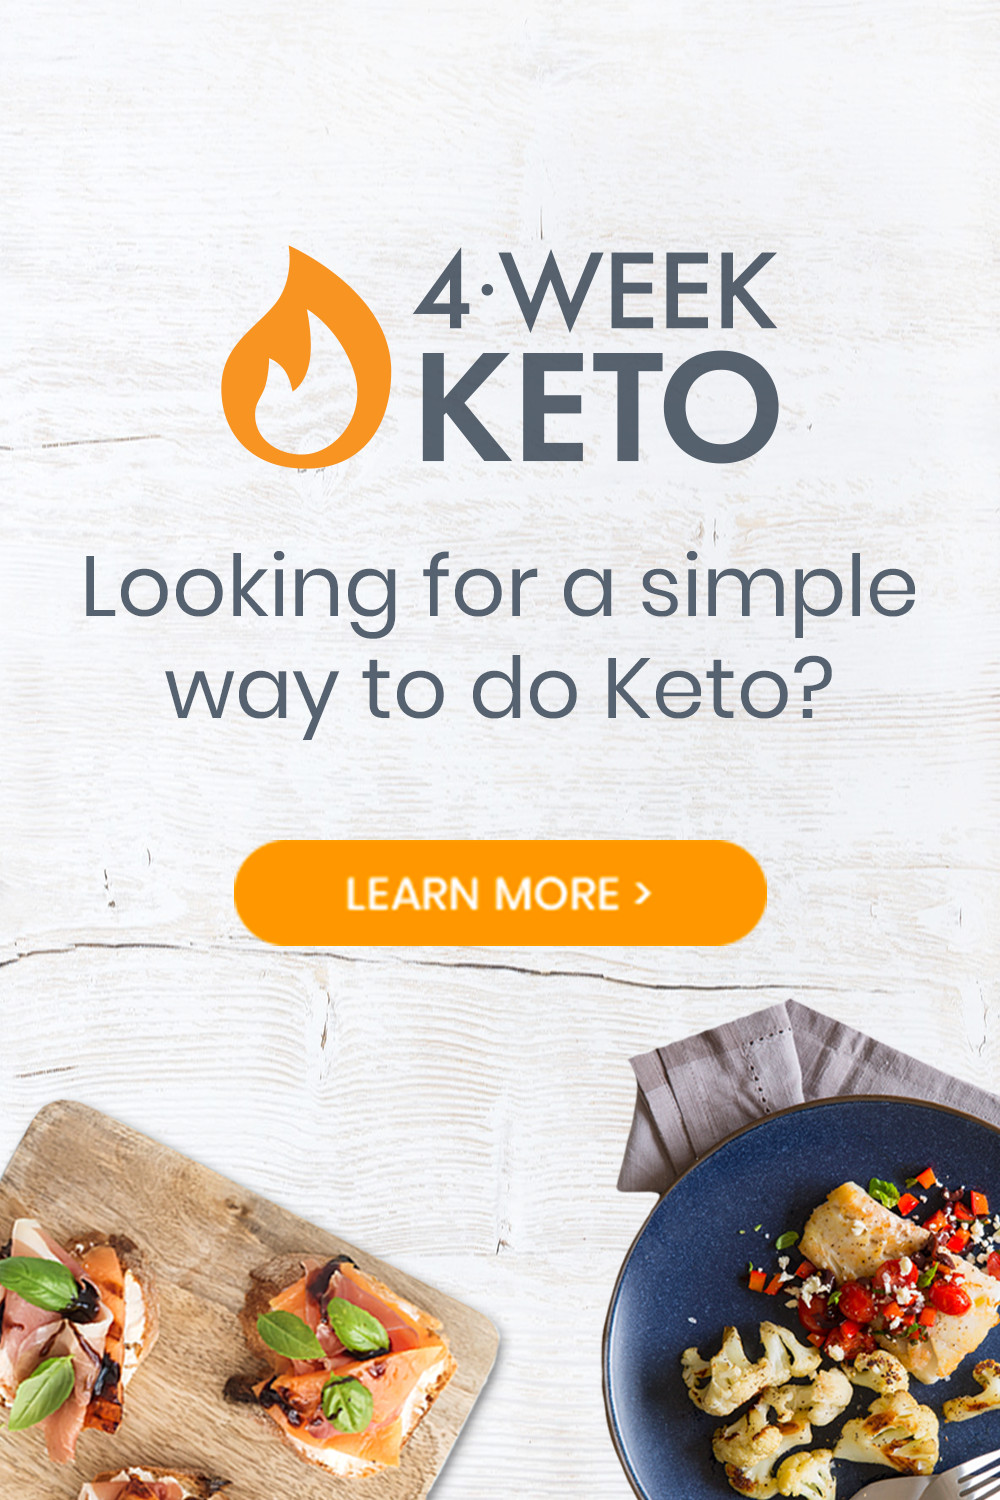 Mexican Keto Meal Plan
 Try our NEW 4 Week Keto Meal Plan with a free 14 day trial